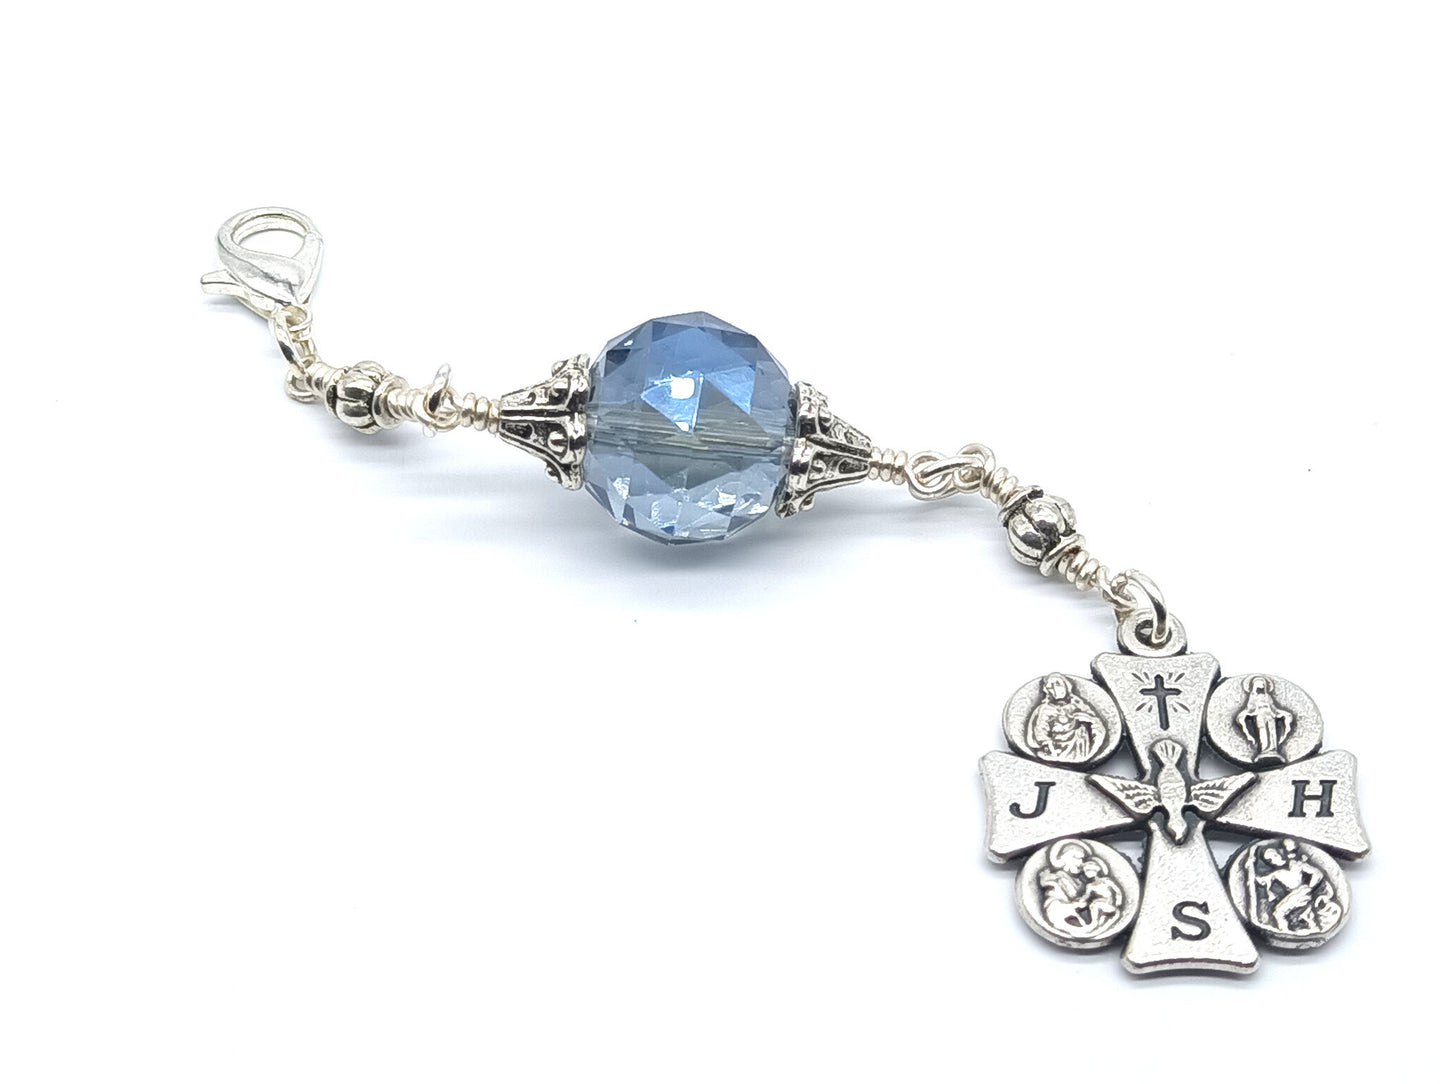 Four way cross unique rosary beads purse clip medal with blue crystal bead and silver bead caps and lobster clasp.